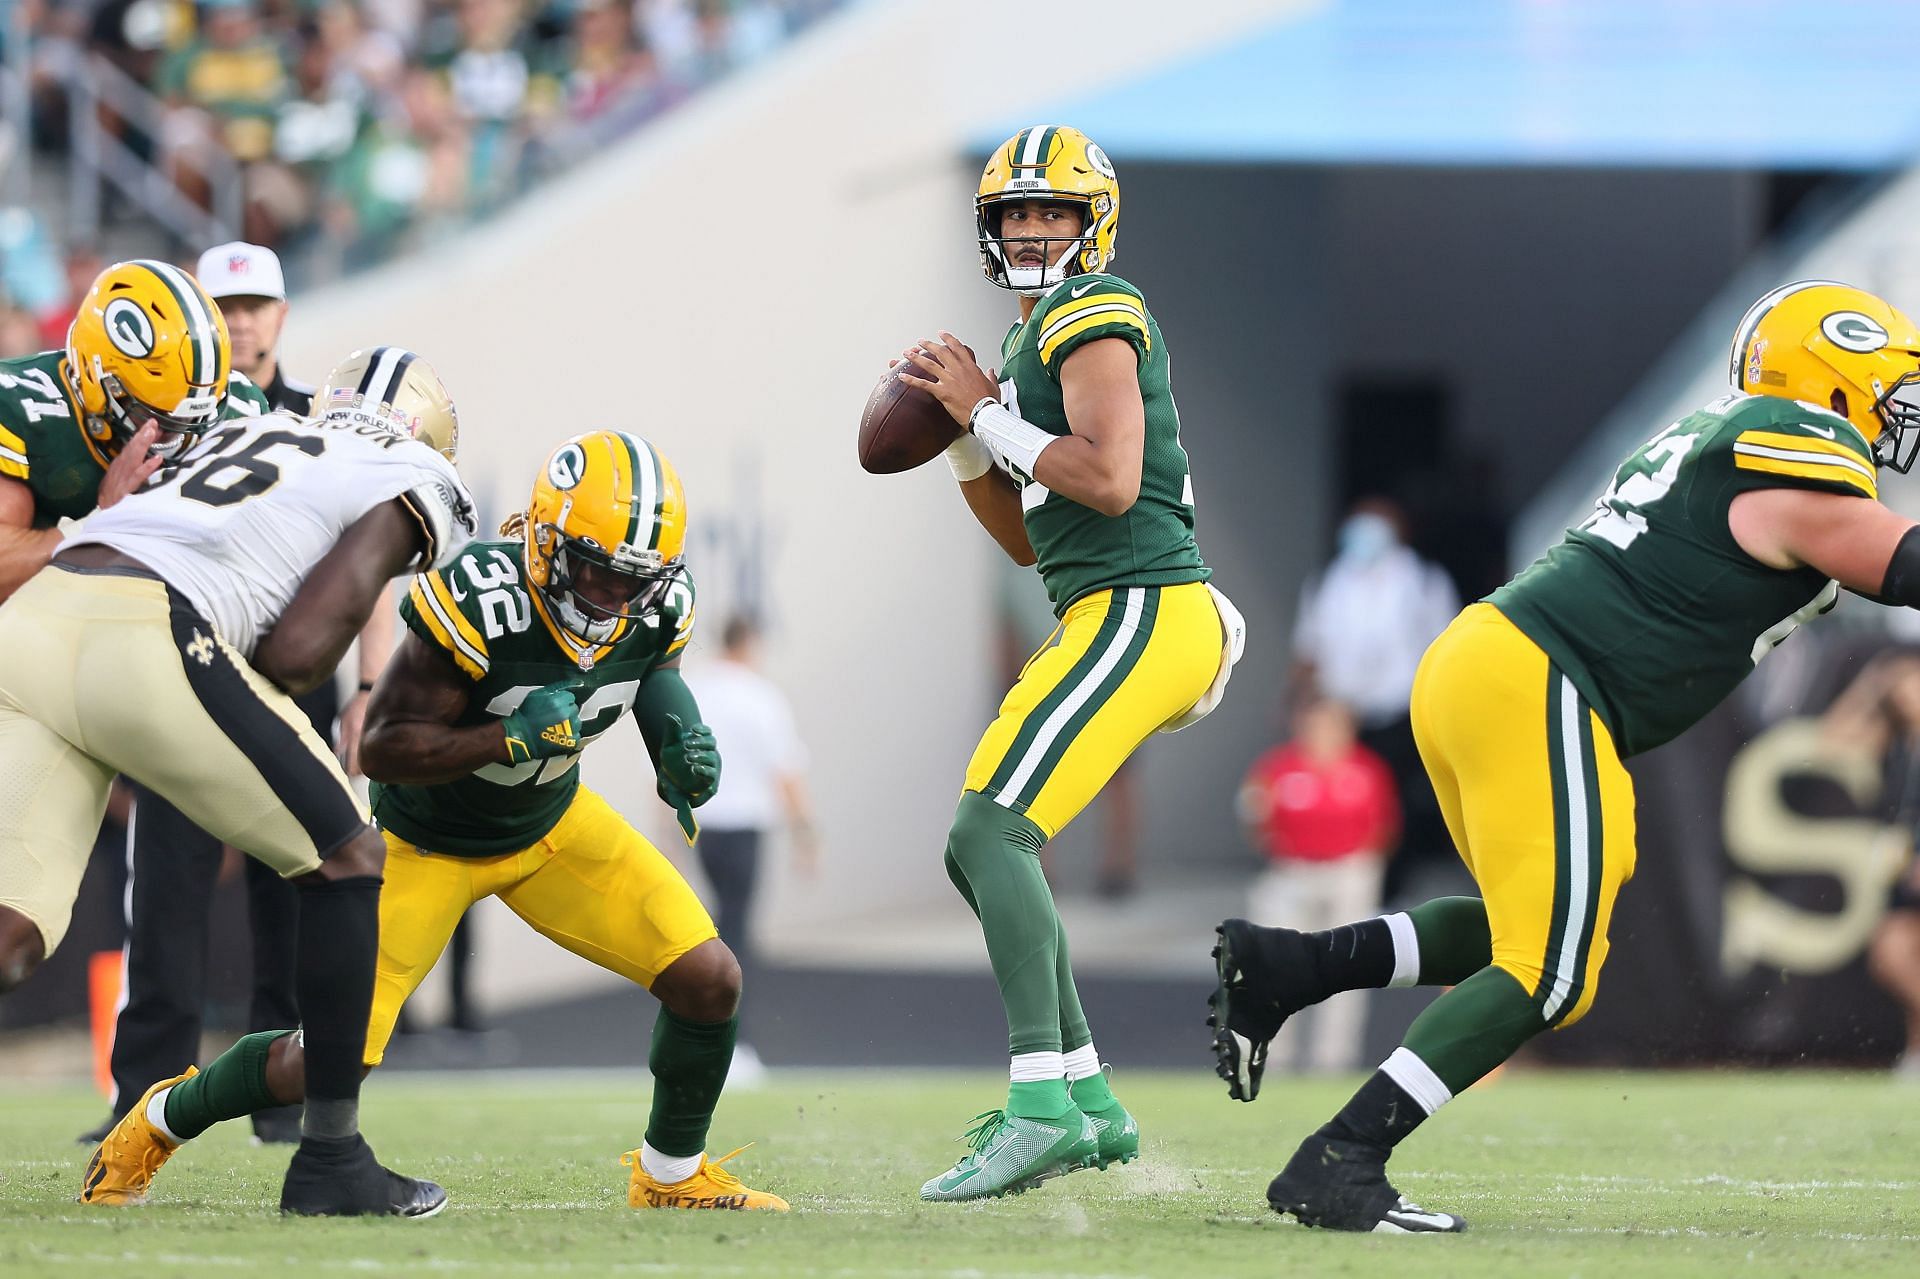 Green Bay Packers quarterback Jordan Love drops back to pass during Week 1 action against New Orleans (Photo: Getty)